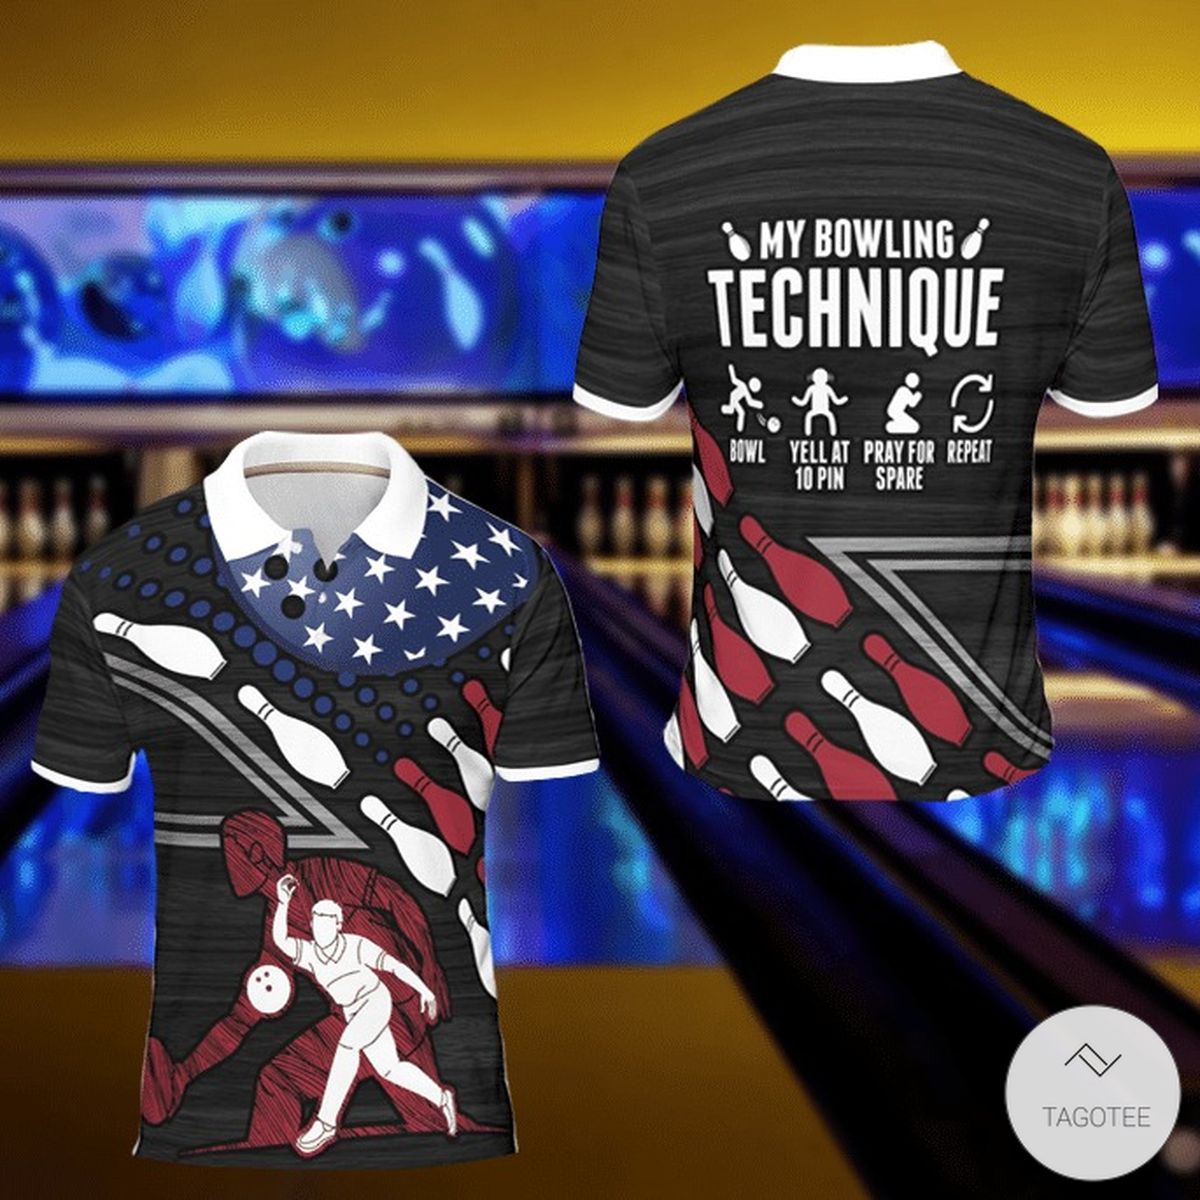 My-Bowling-Technique-Bowl-Yell-At-10-Pin-Pray-For-Spare-Repeat-Polo-Shirt